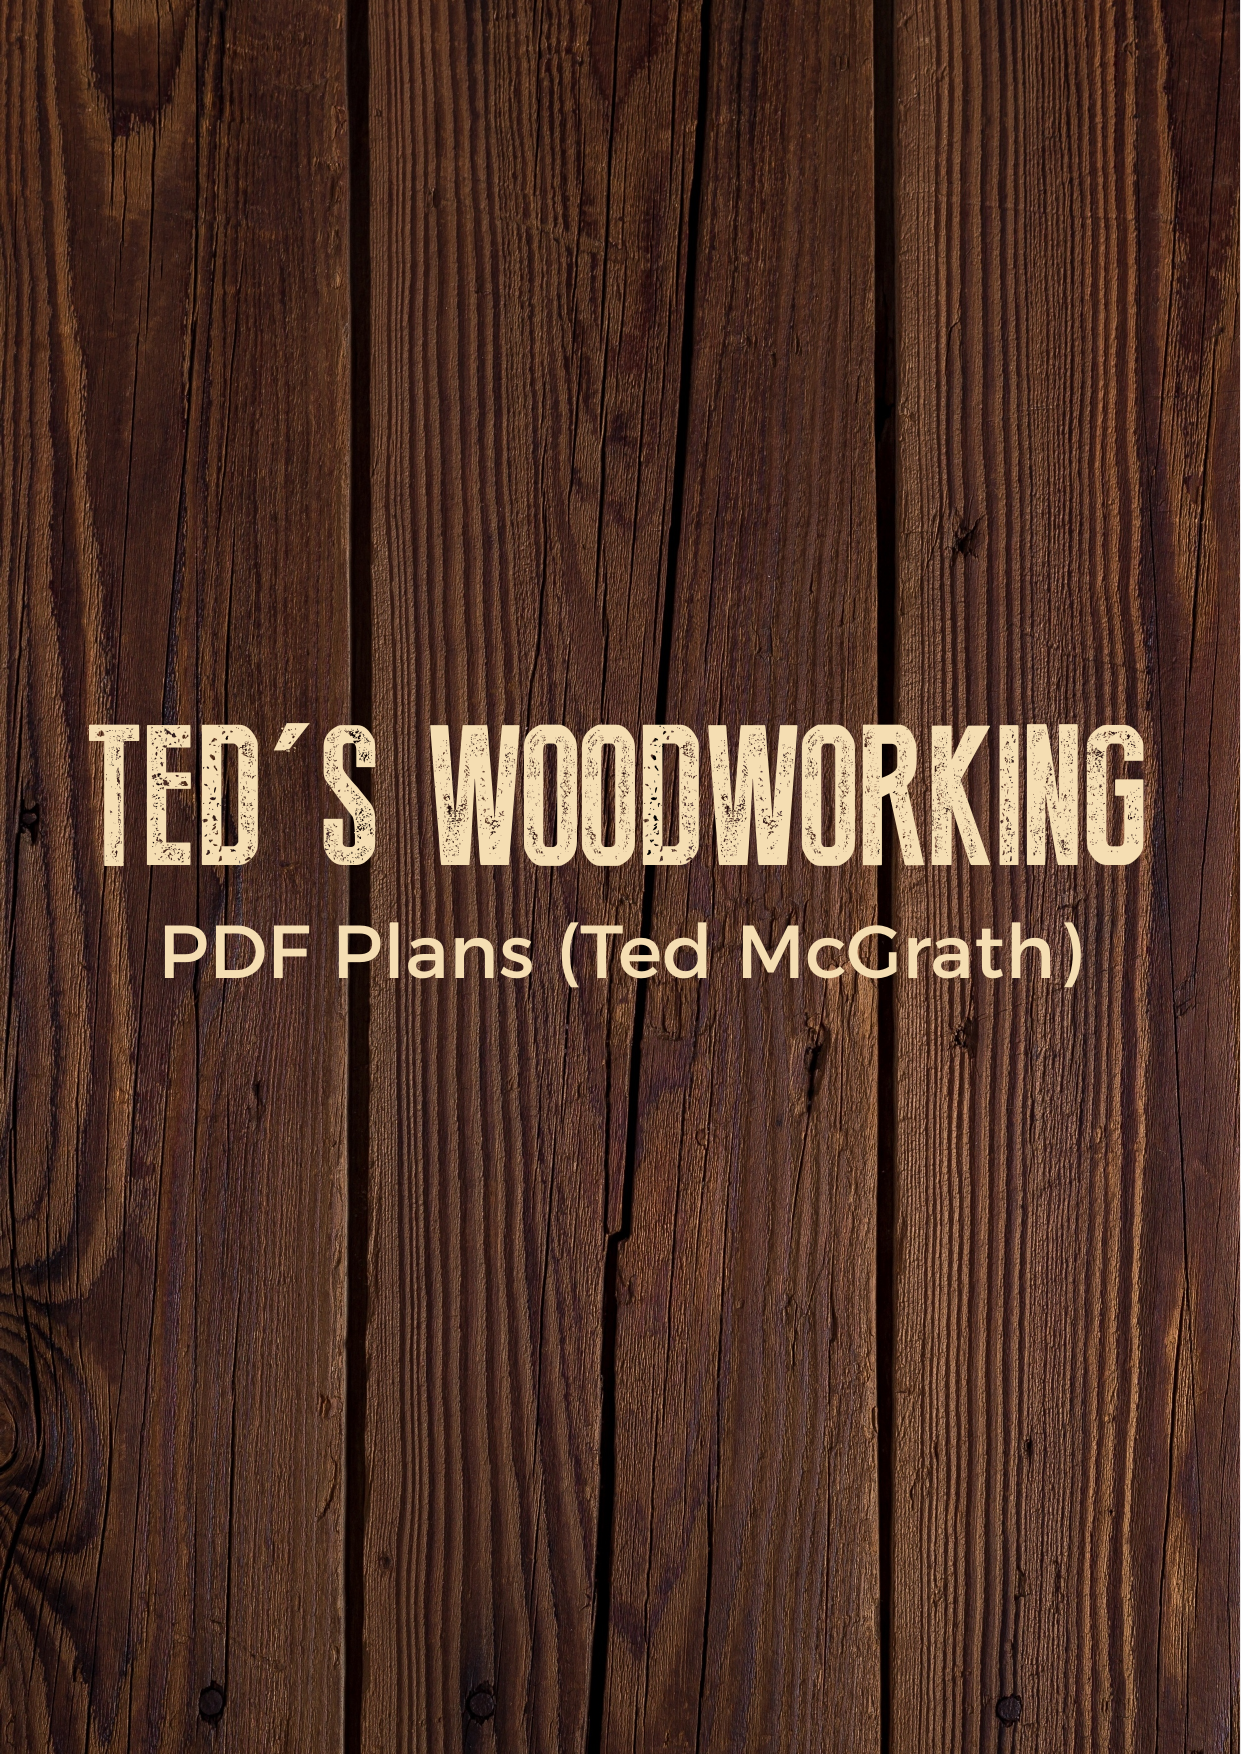 Ted S Woodworking Plans Pdf Ted Mcgrath